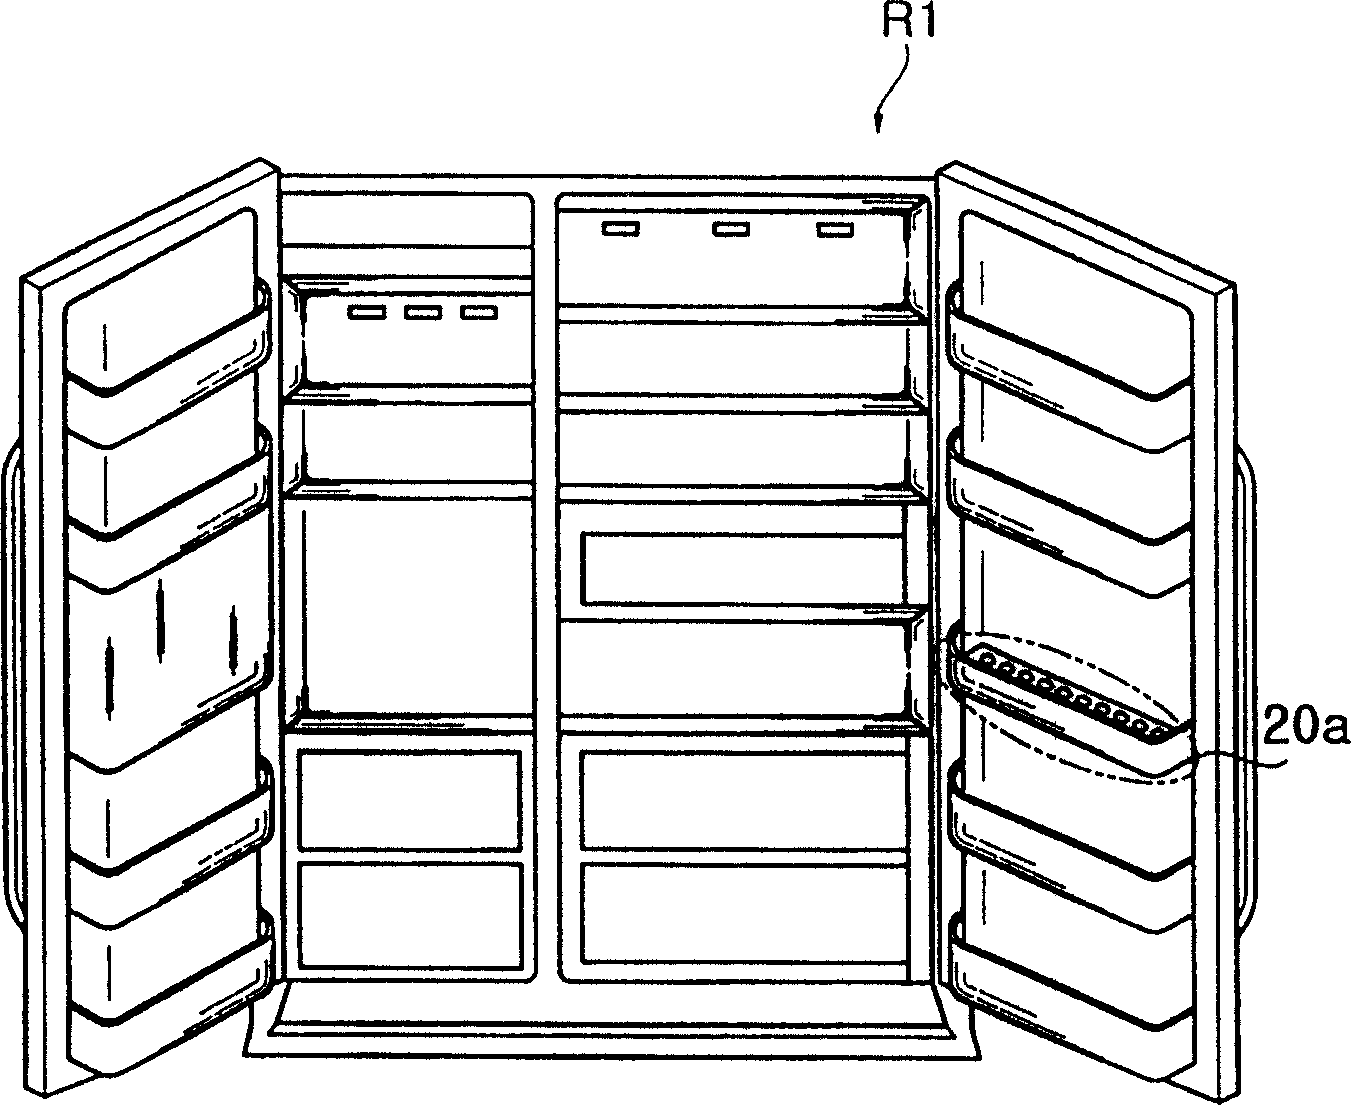 Automatic ordering foods type refrigerator and its operating method